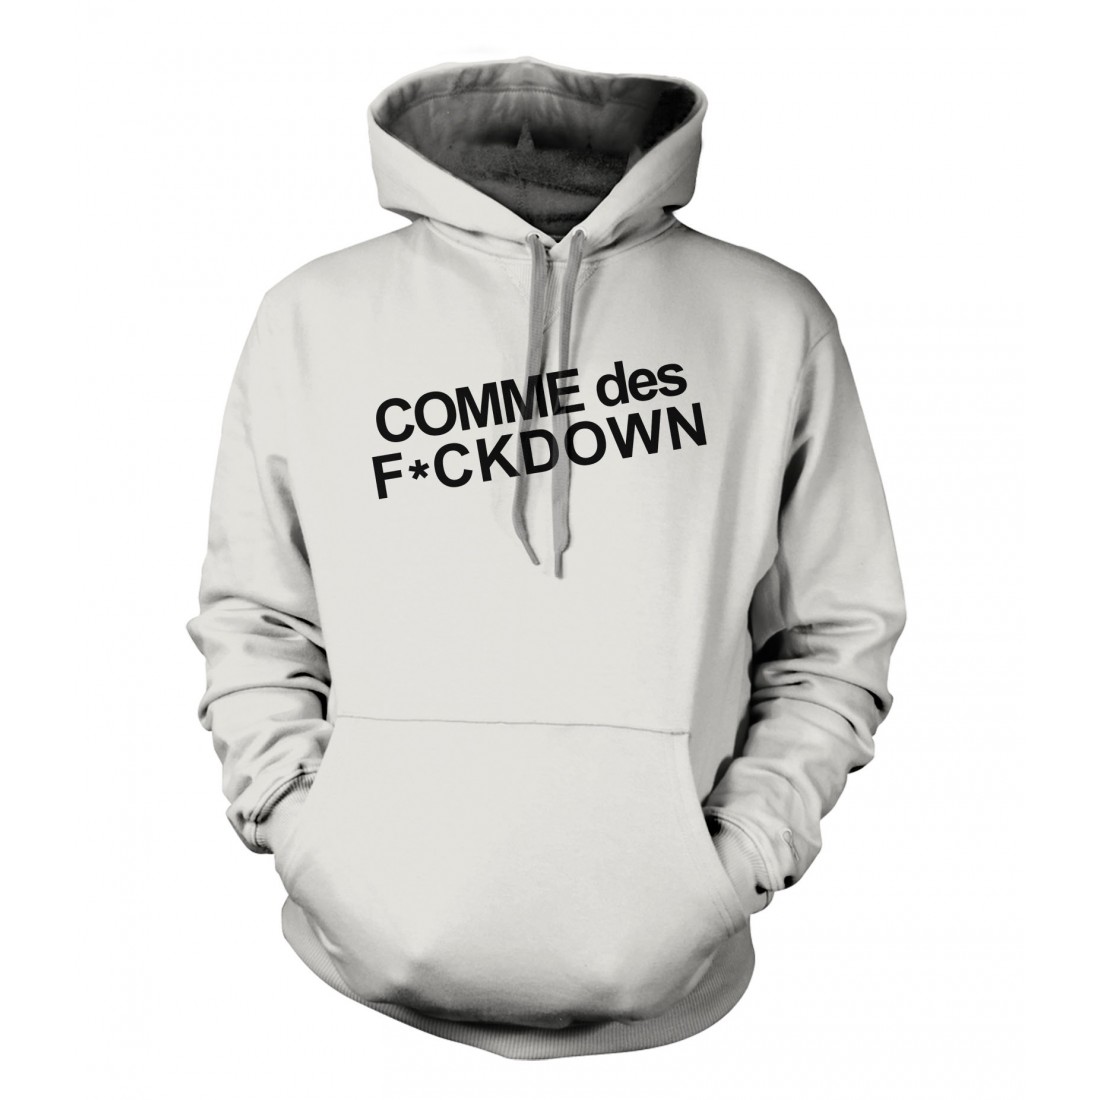 Very cool худи. Coolest Hoodie. Research одежда. SSUR одежда. F de s